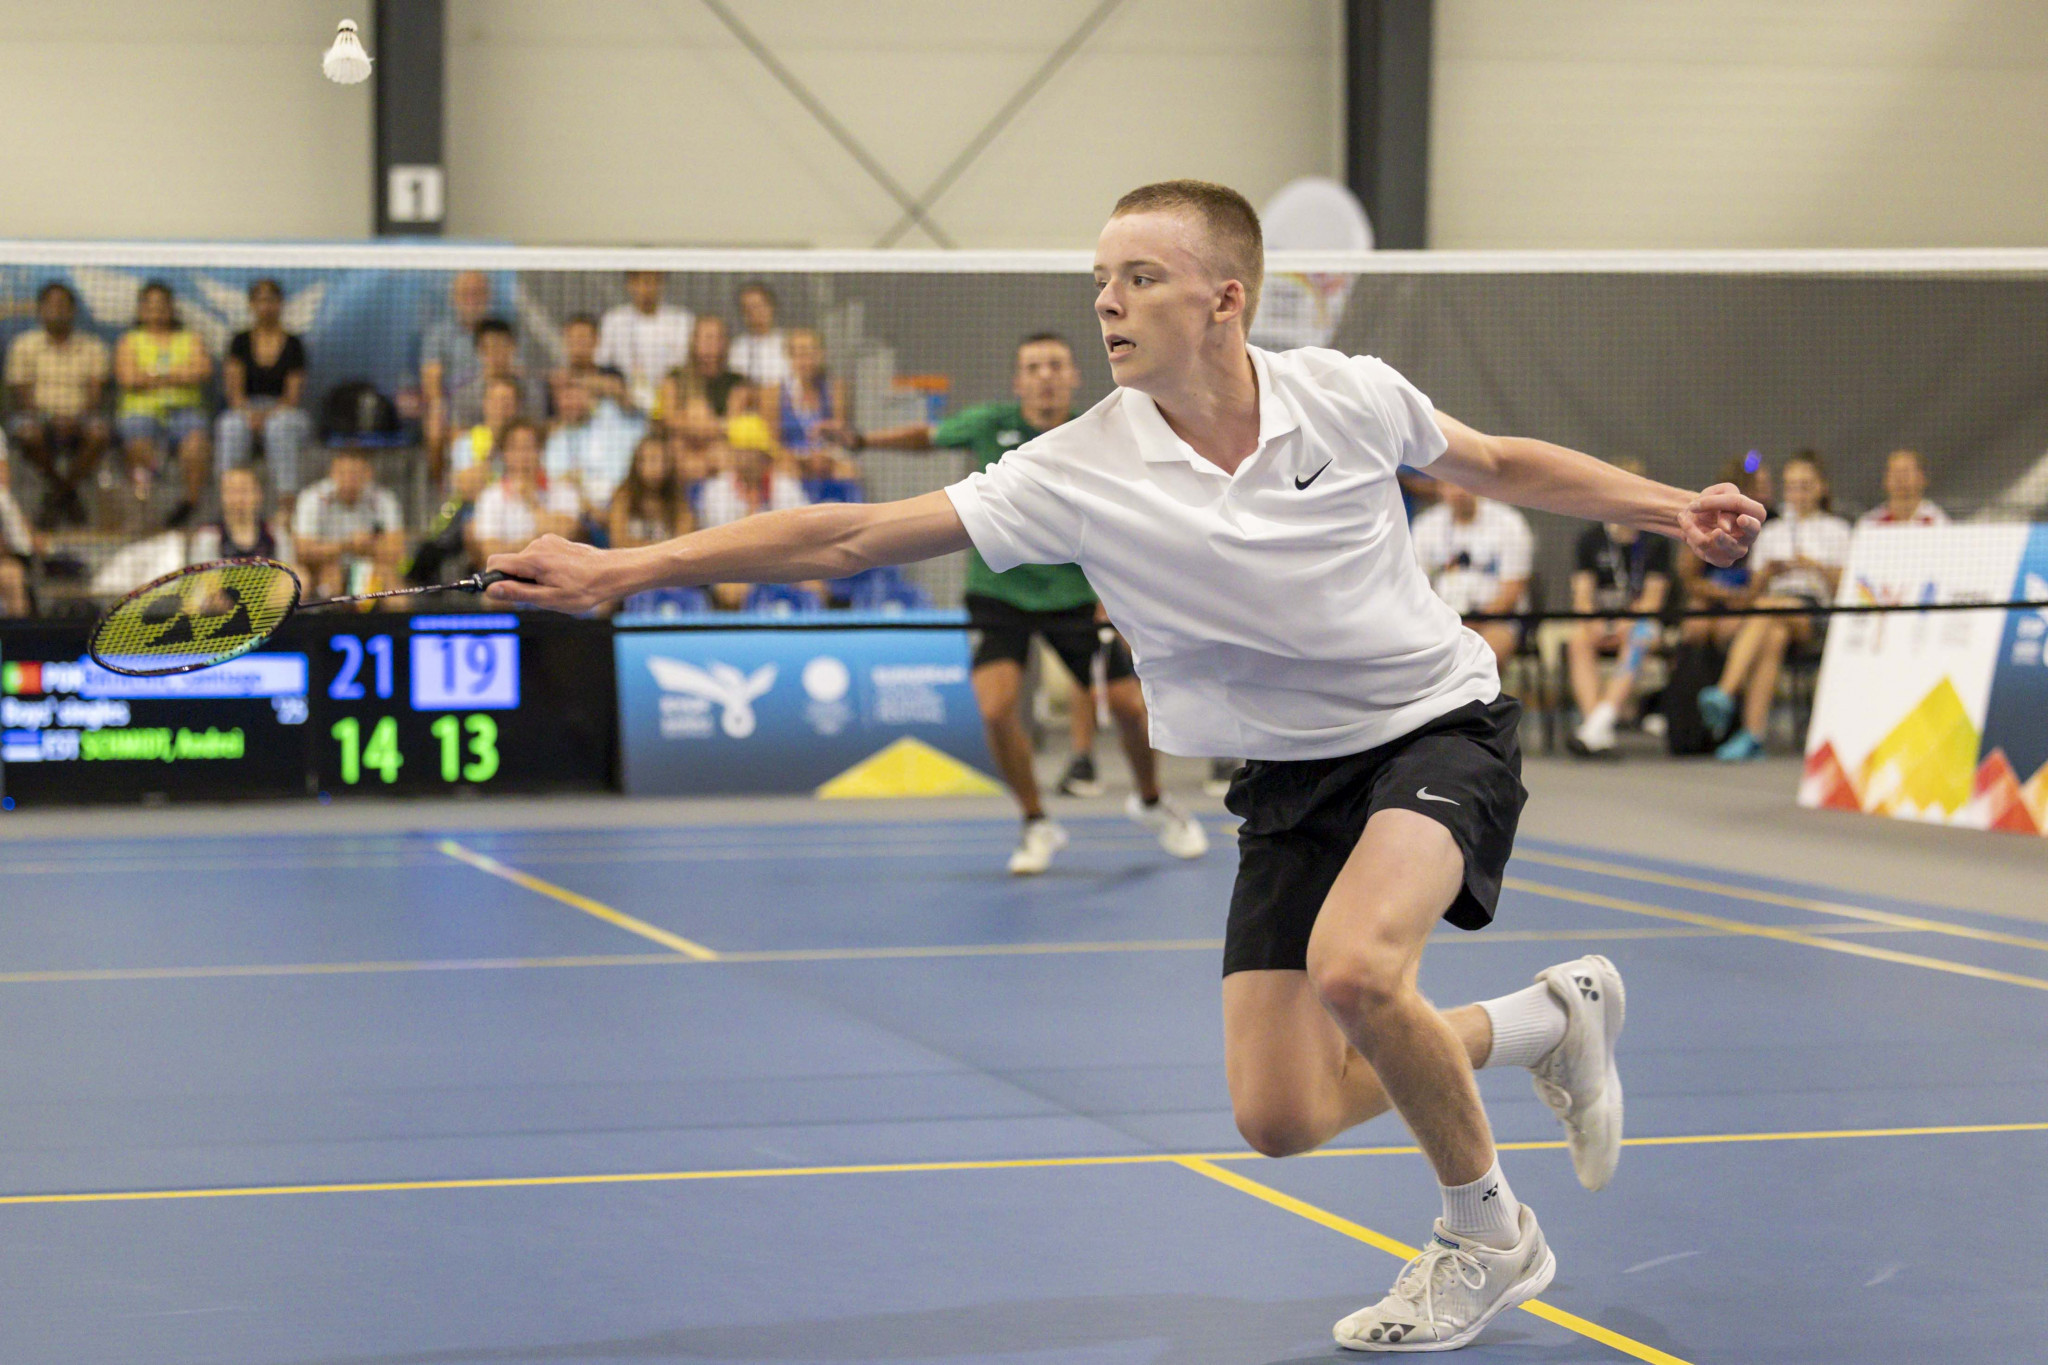 Andrei Schmidt of Estonia, pictured, suffered a swift 21-14, 21-19 loss to Portugal's Santiago Batalha in the boys' badminton singles competition ©EOC